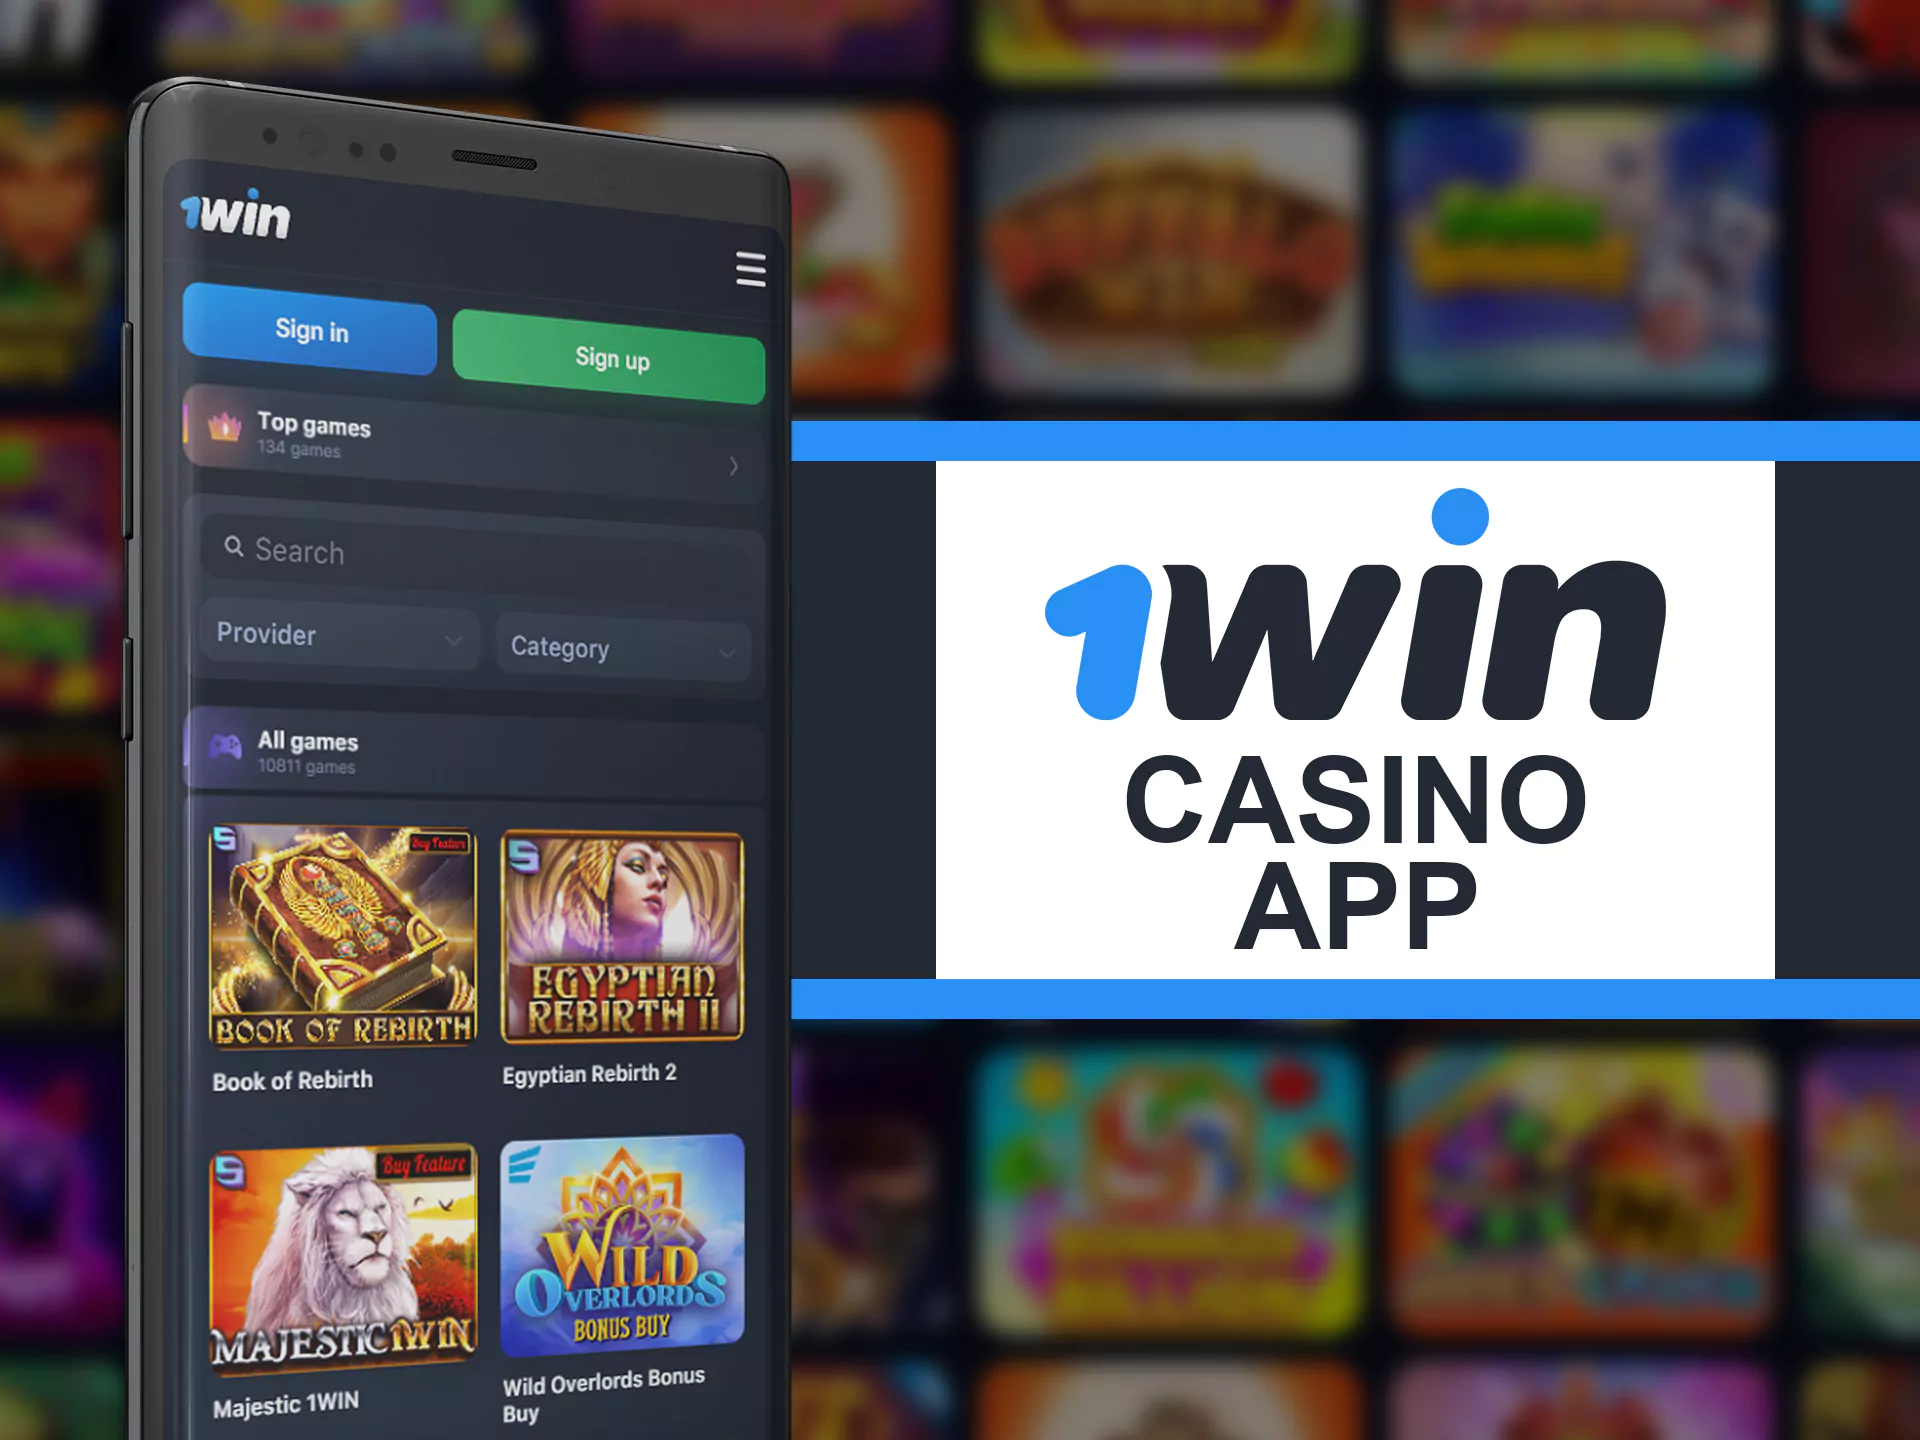 Play 1win casino comfortly with app.